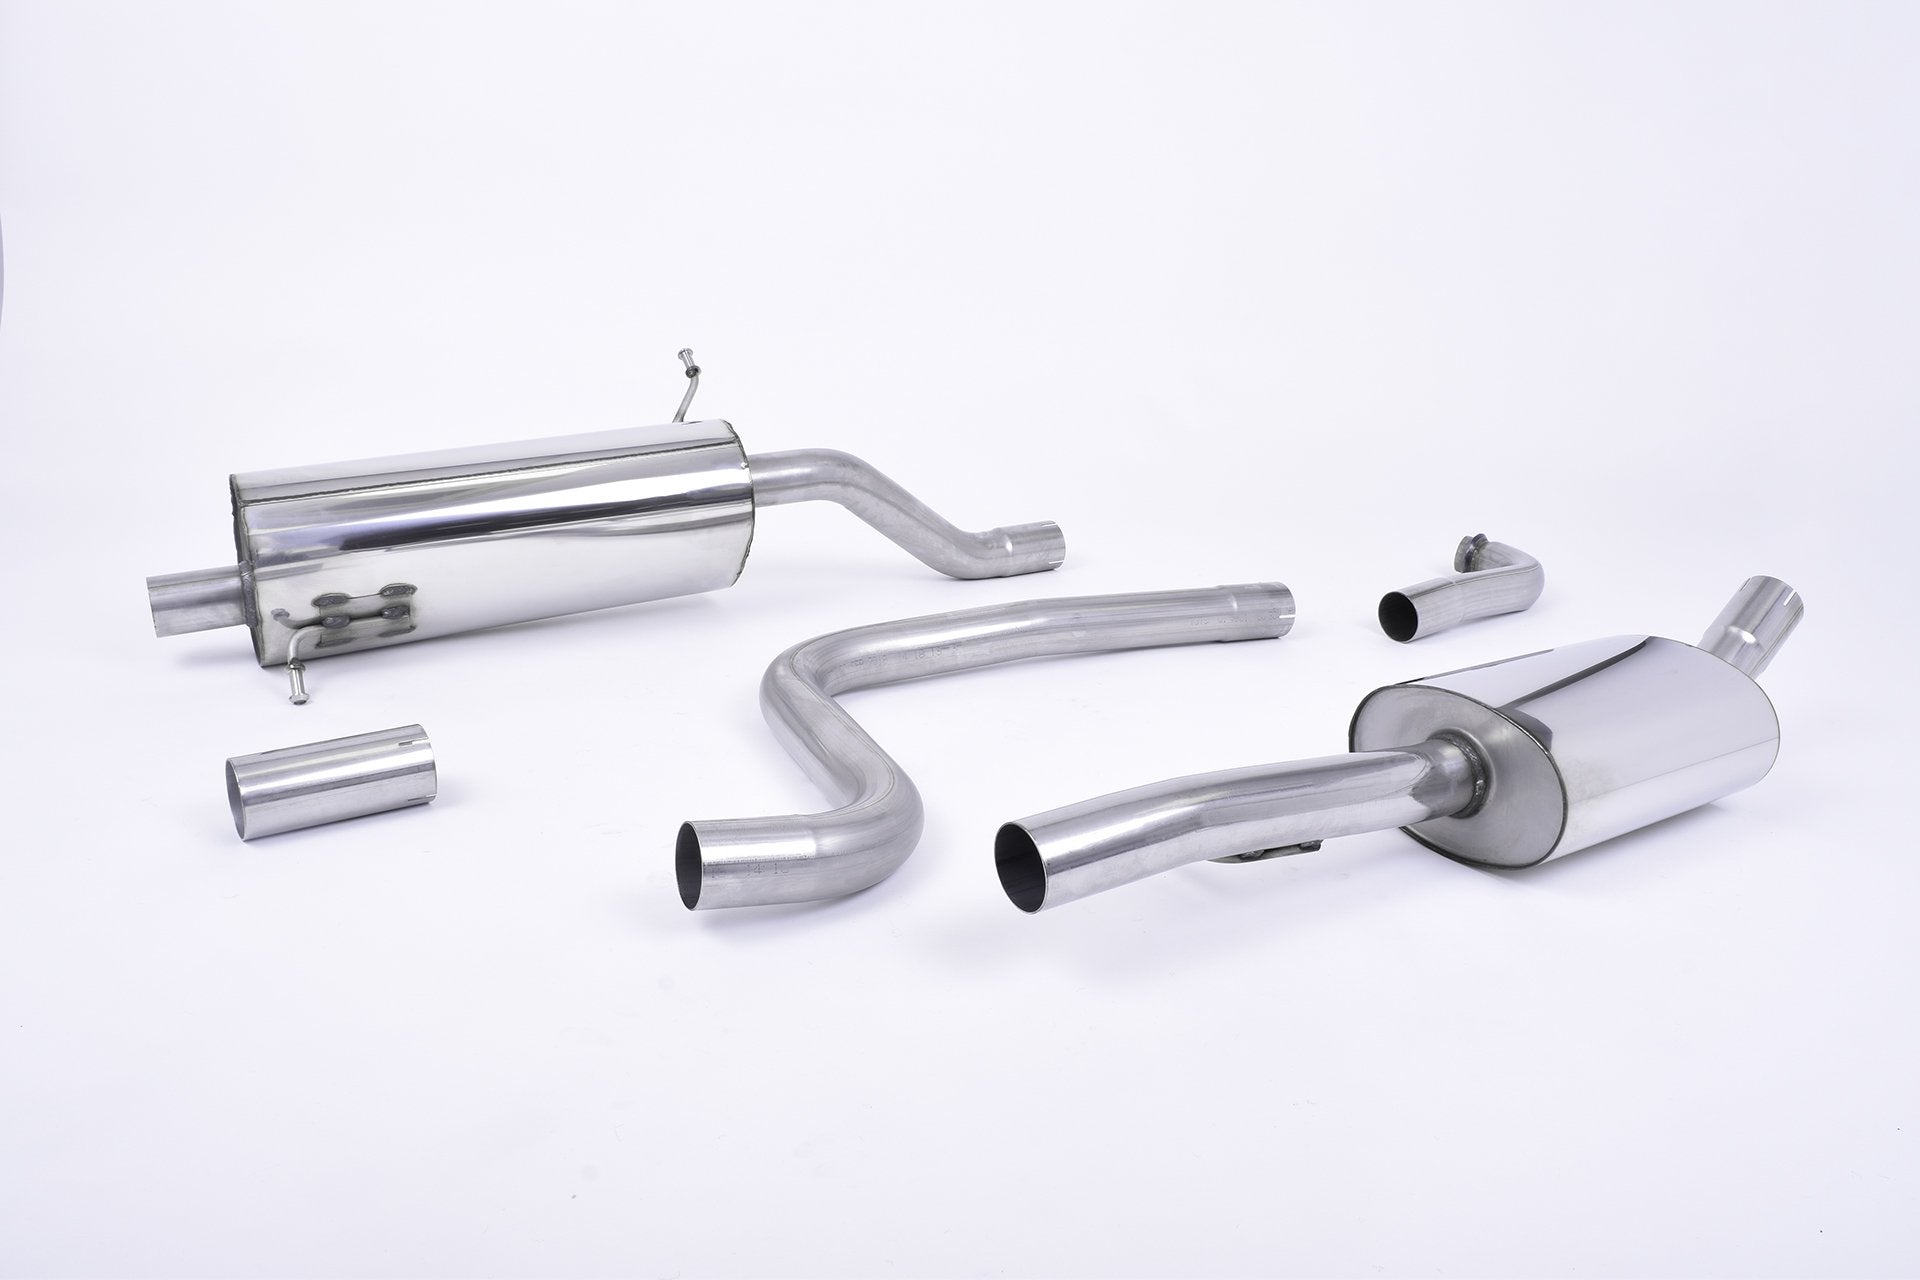 Milltek Catback Exhaust for MK8 Fiesta 1.0 with Polished Tips